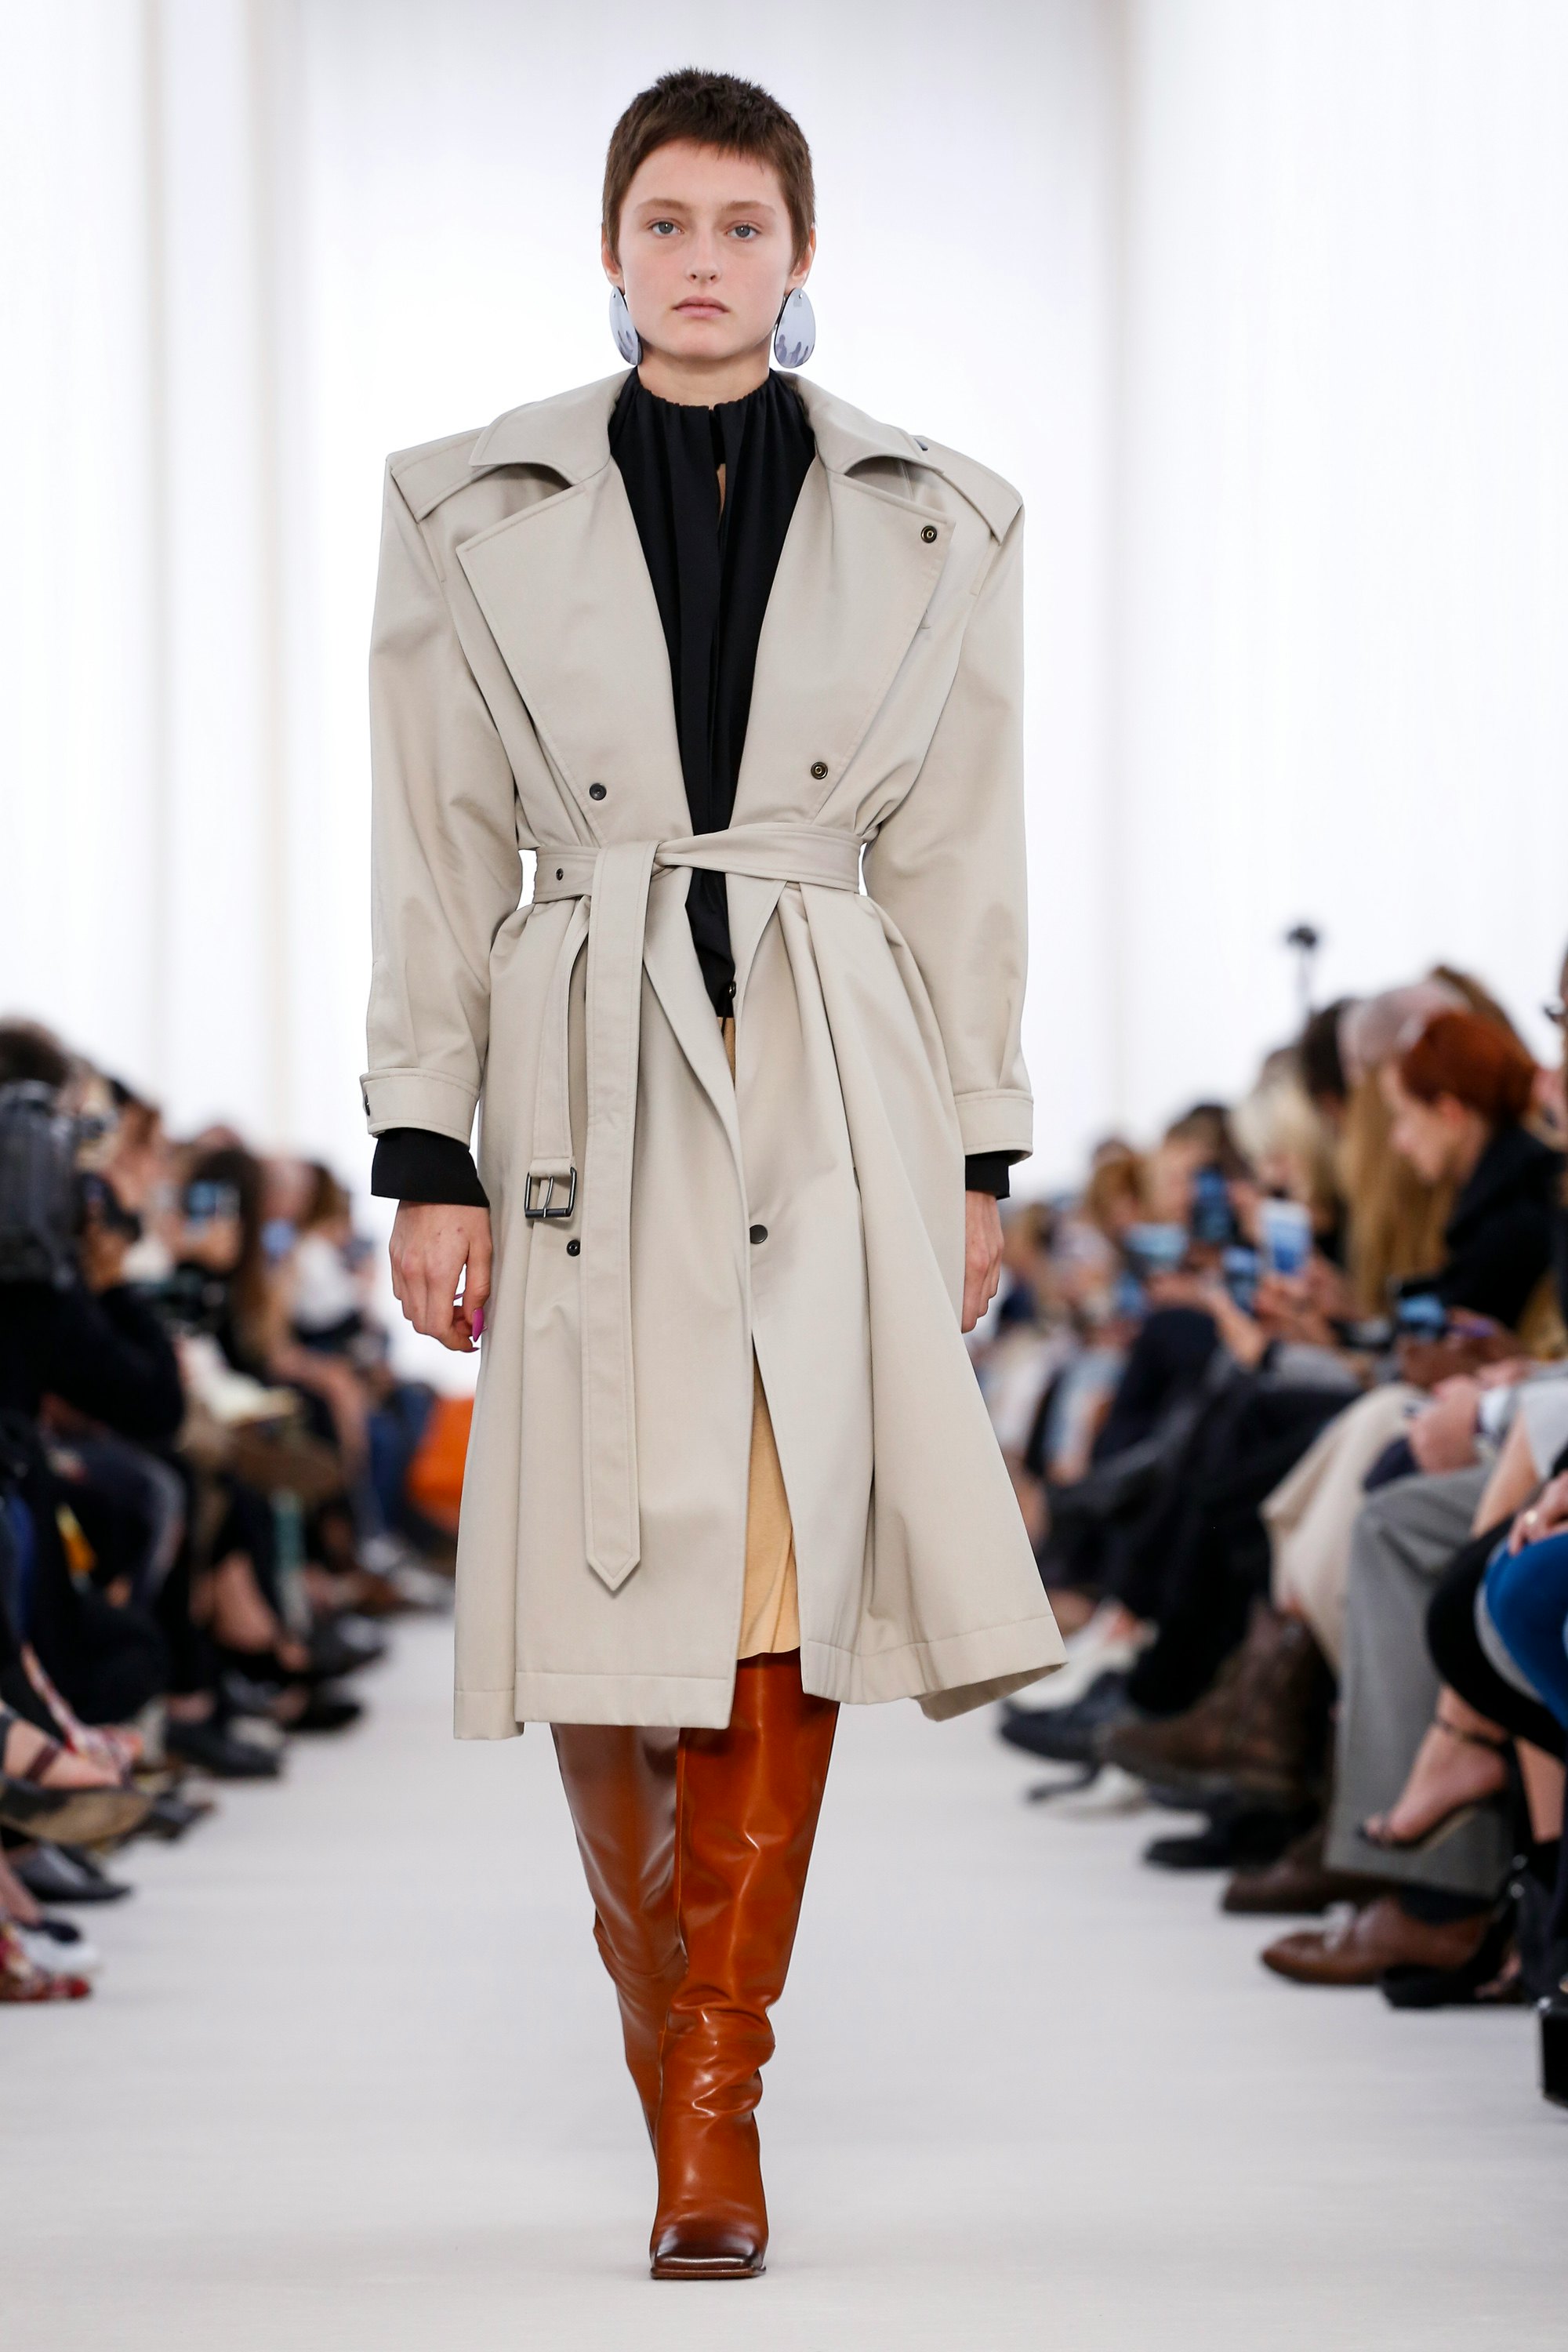 Karlie Kloss Keeps it Simple this Fall Season in a Burberry Trench Coat